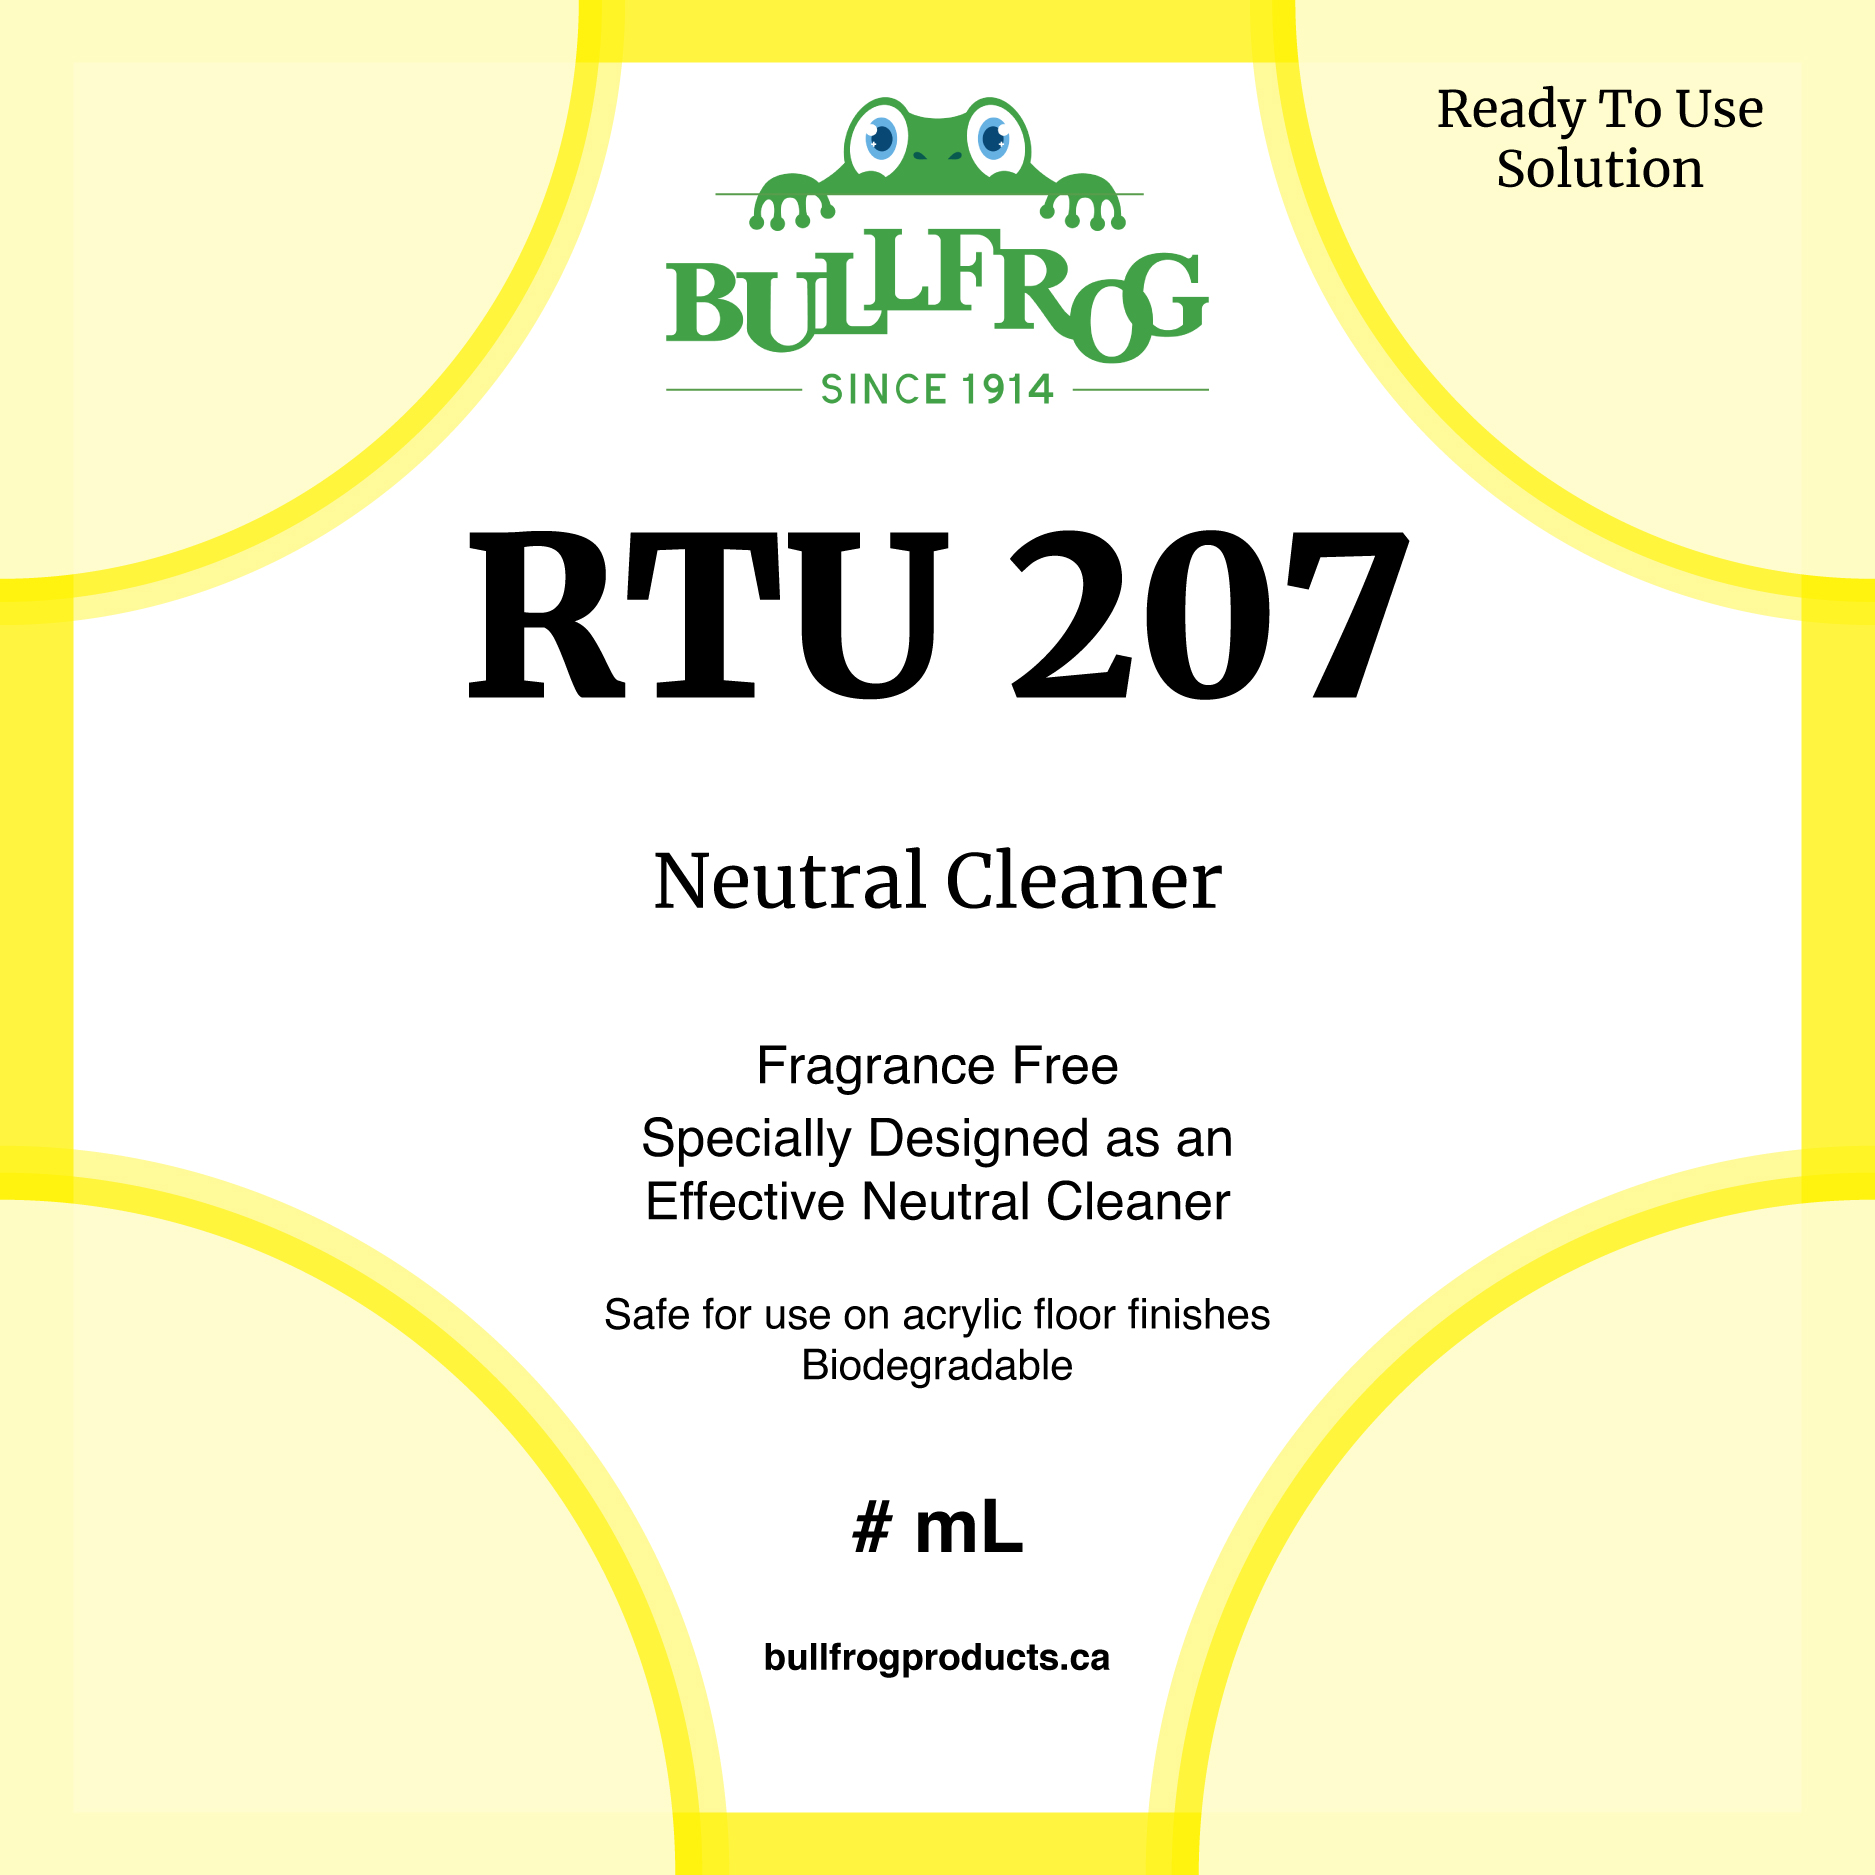 RTU 207 Front Label image and 2L product image